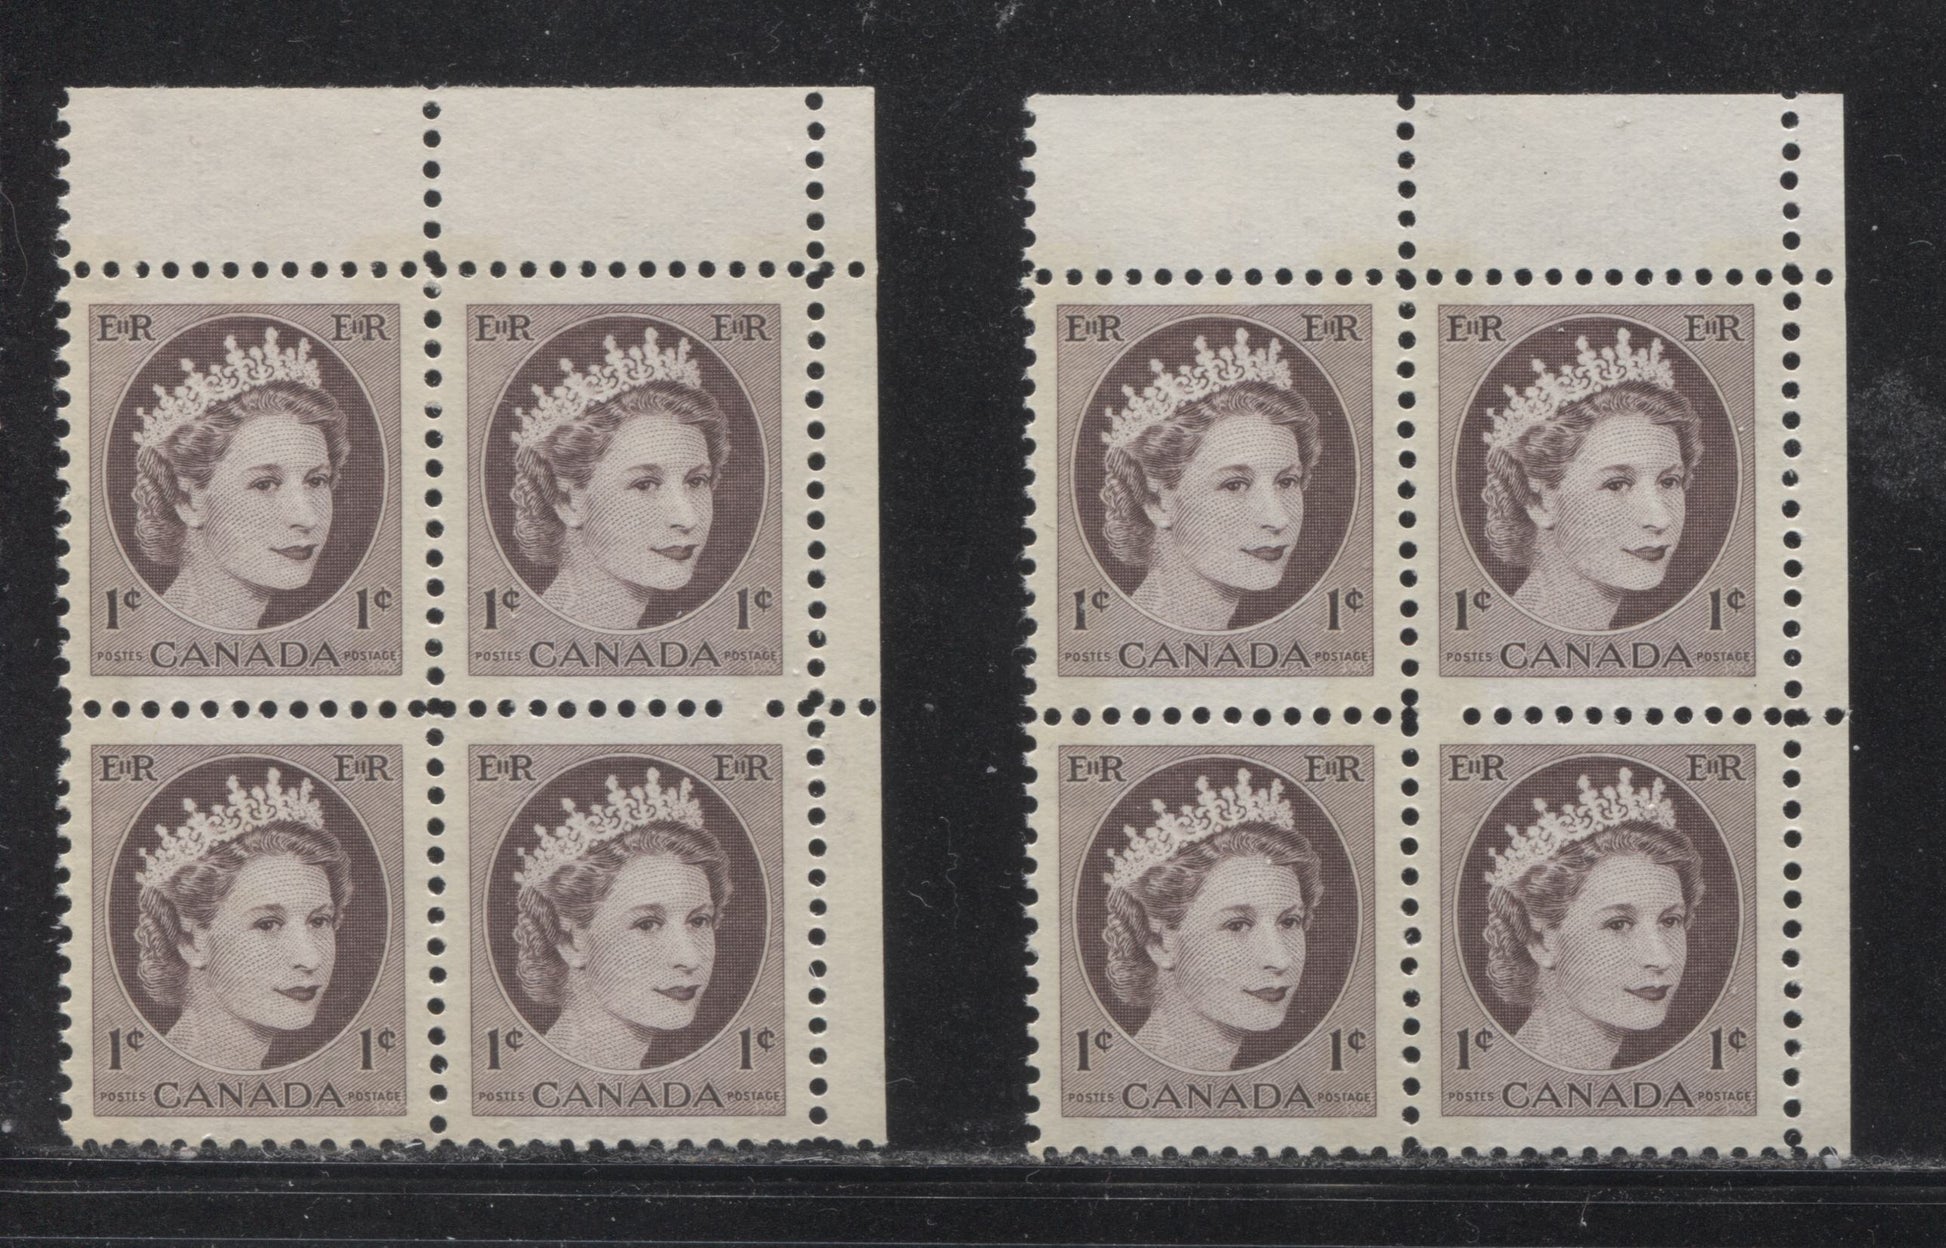 Canada #337p(var) 1c Chocolate Queen Elizabeth II, 1954-1962 Wilding Issue, Upper Right Blank Winnipeg Tagged Blocks of 4, Two Different, Various Perfs., DF Gr Vertically Ribbed Paper, Streaky Semi Gloss Gum, Bluish White Tagging With Extra Spot, VFNH Brixton Chrome 